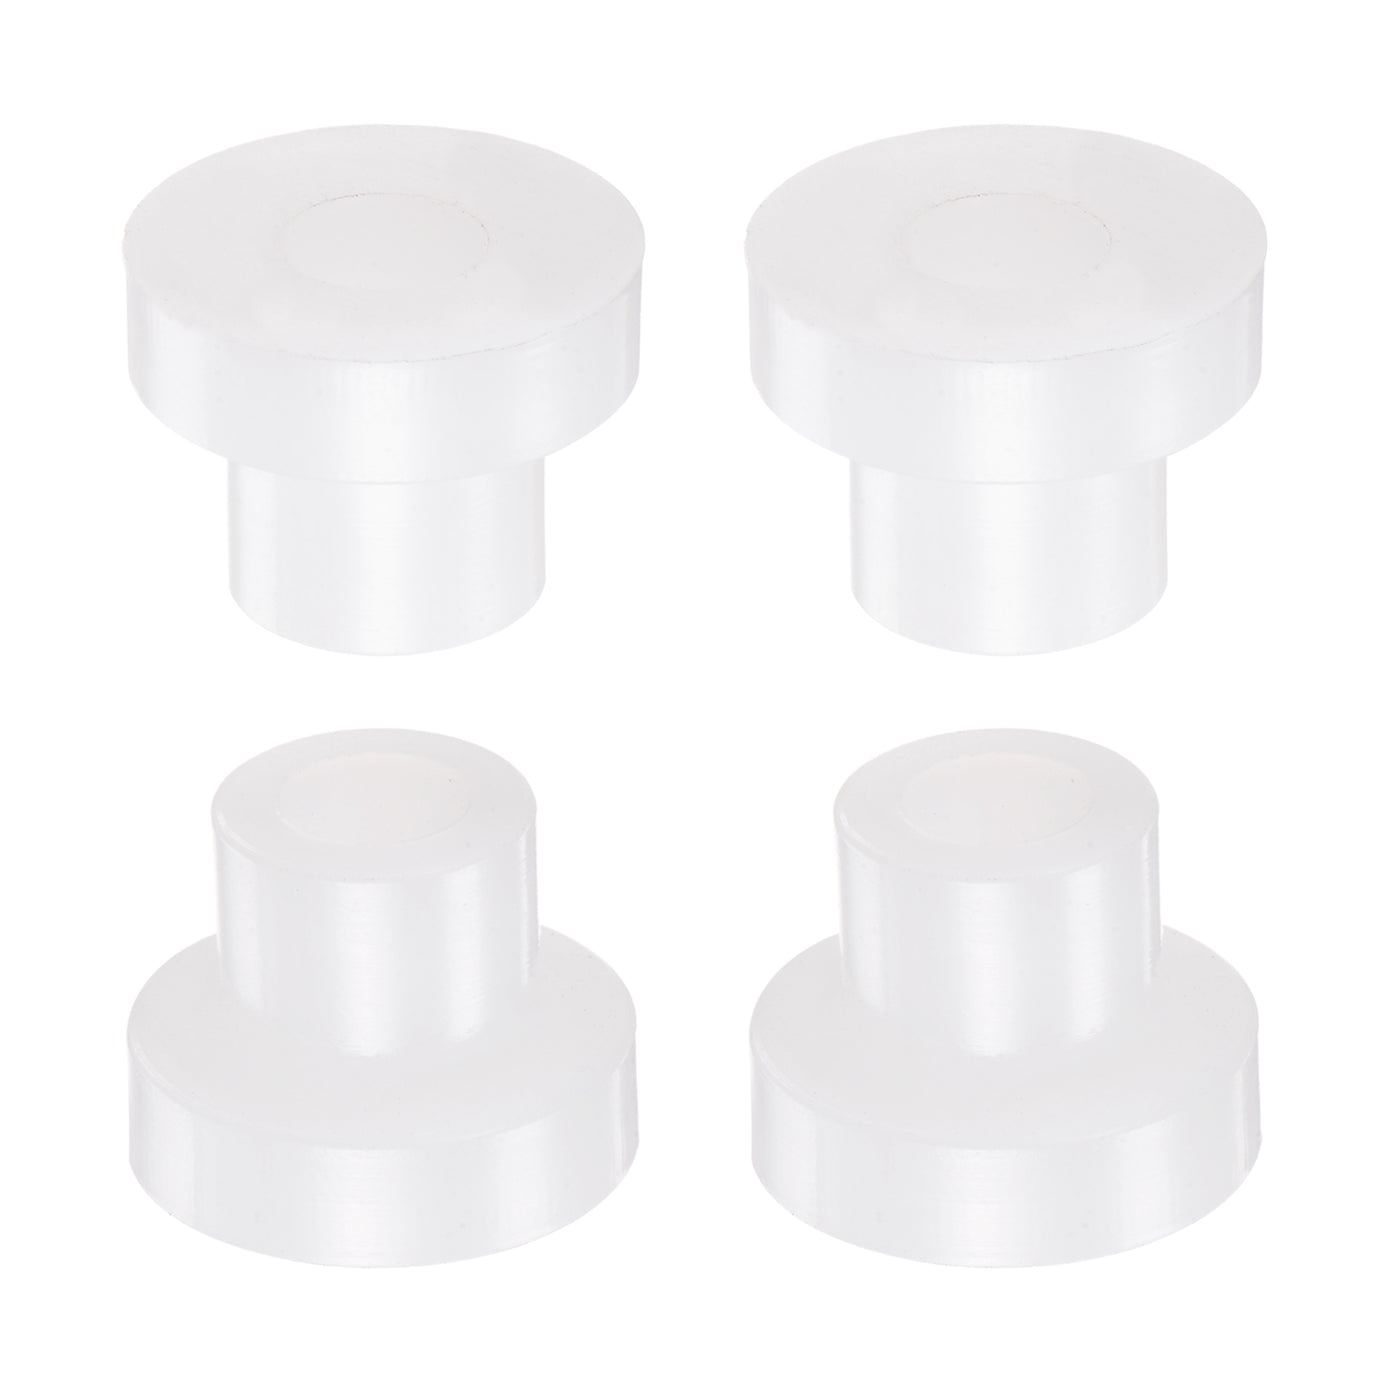 uxcell Uxcell 4pcs Flanged Sleeve Bearings 9mm ID 15mm OD 18mm Length Nylon Bushings, White